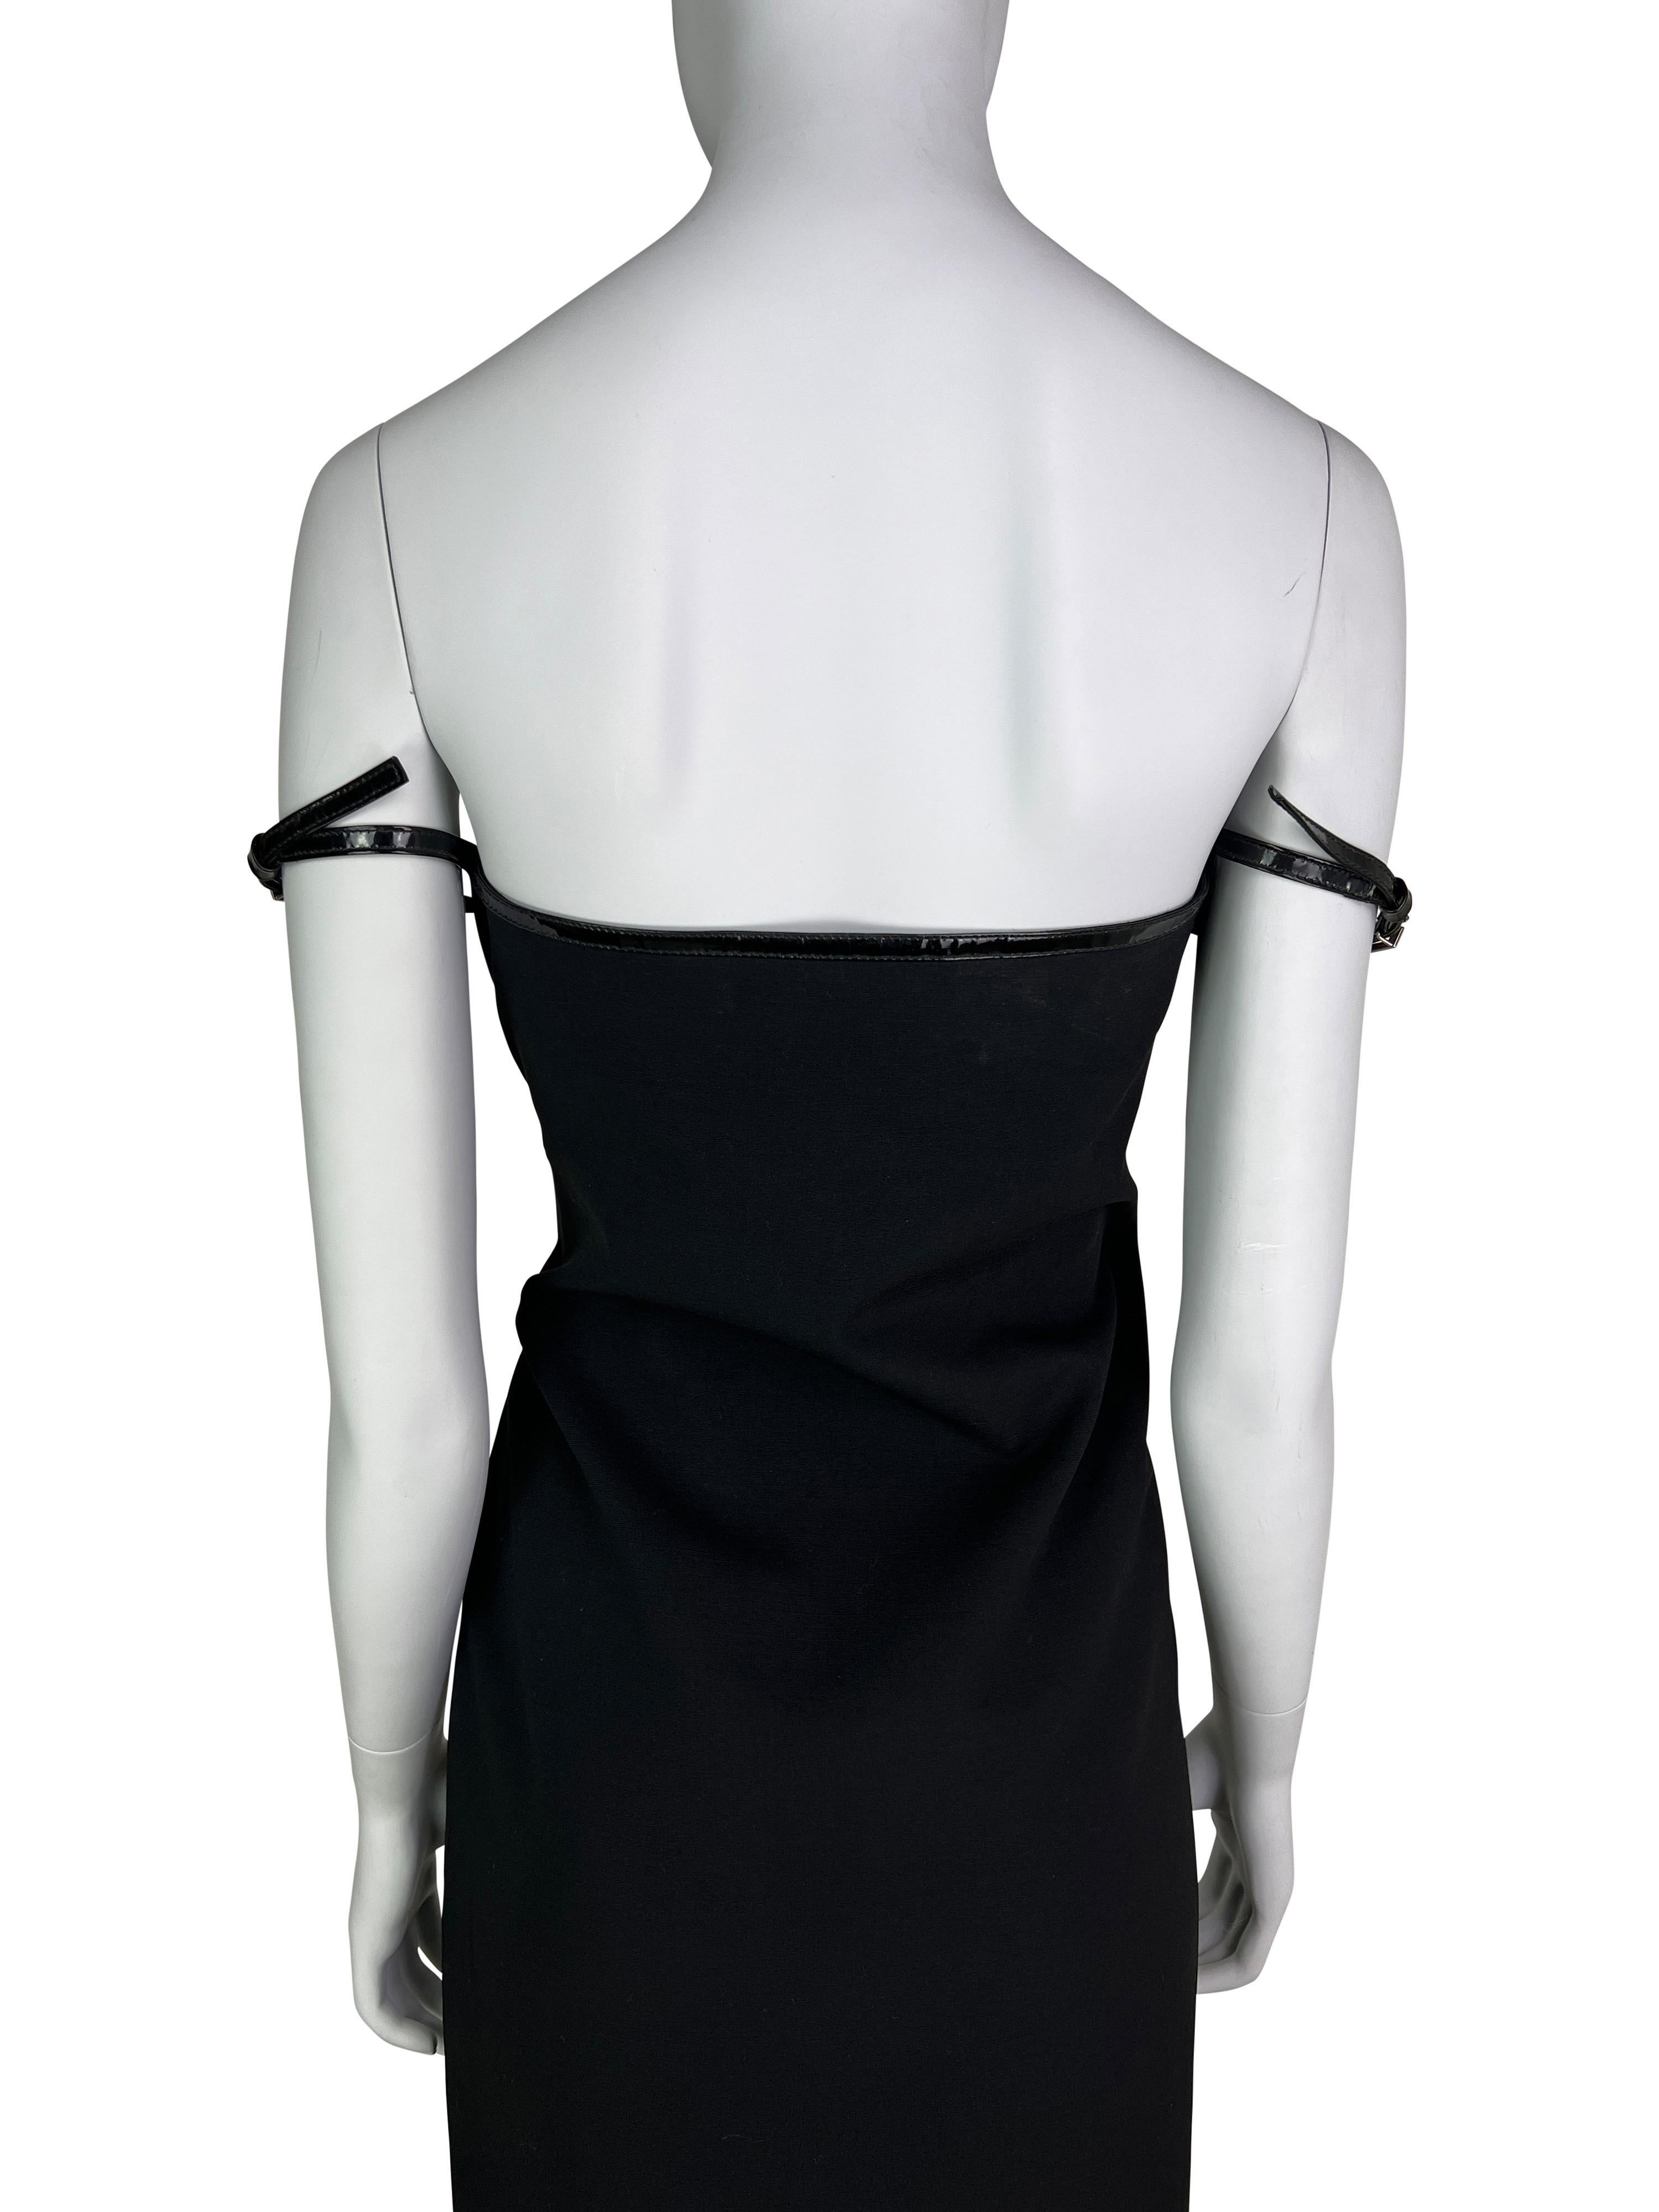 Gucci by Tom Ford Fall 1997 G-logo Strap Evening Black Dress For Sale 3